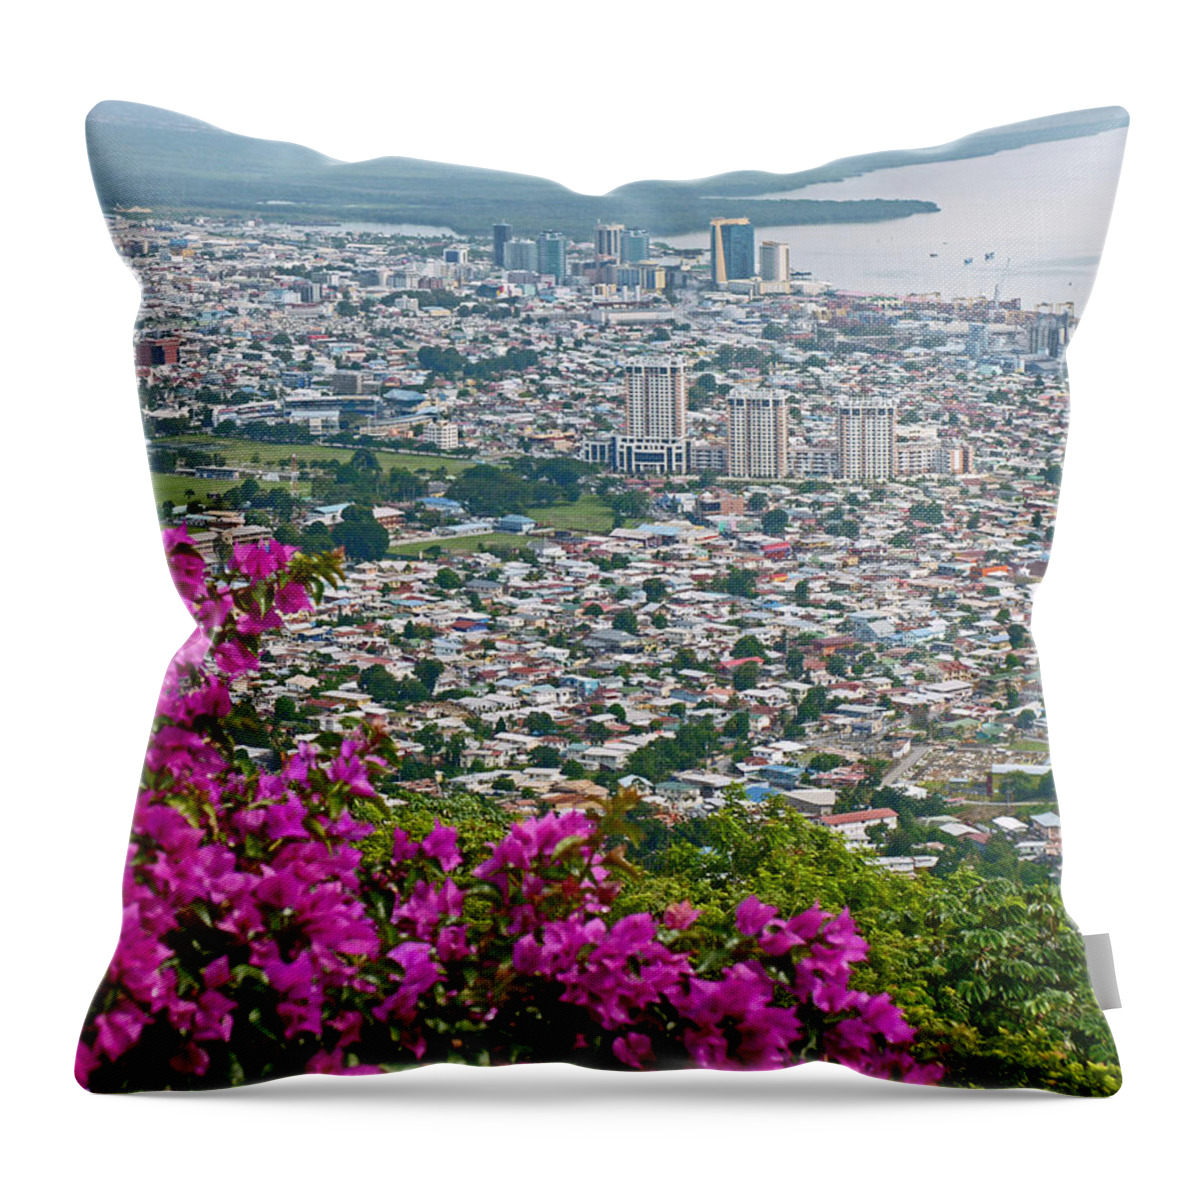 Picture Of Port Of Spain From Fort George Throw Pillow featuring the photograph City of Port of Spain Trinidad by Karin Dawn Kelshall- Best